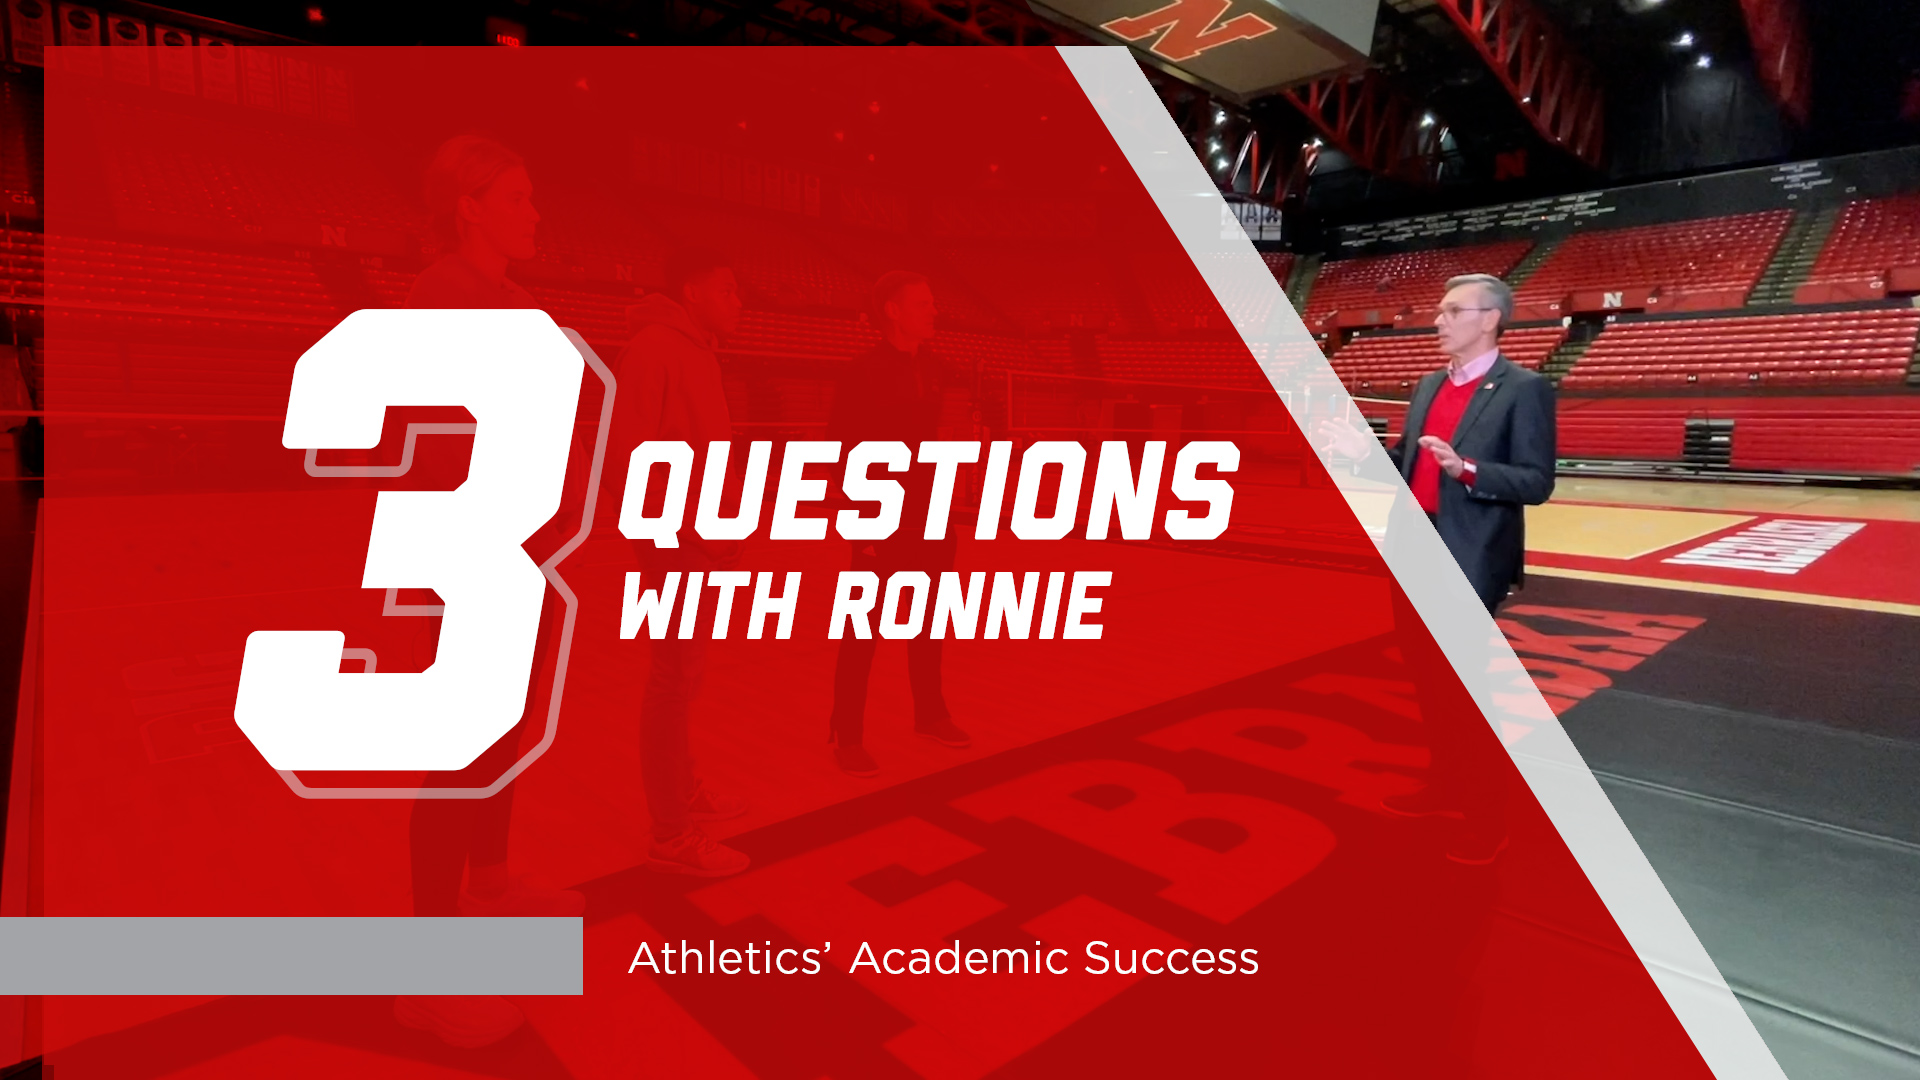 3 Questions with Ronnie | Athletics' Academic Success